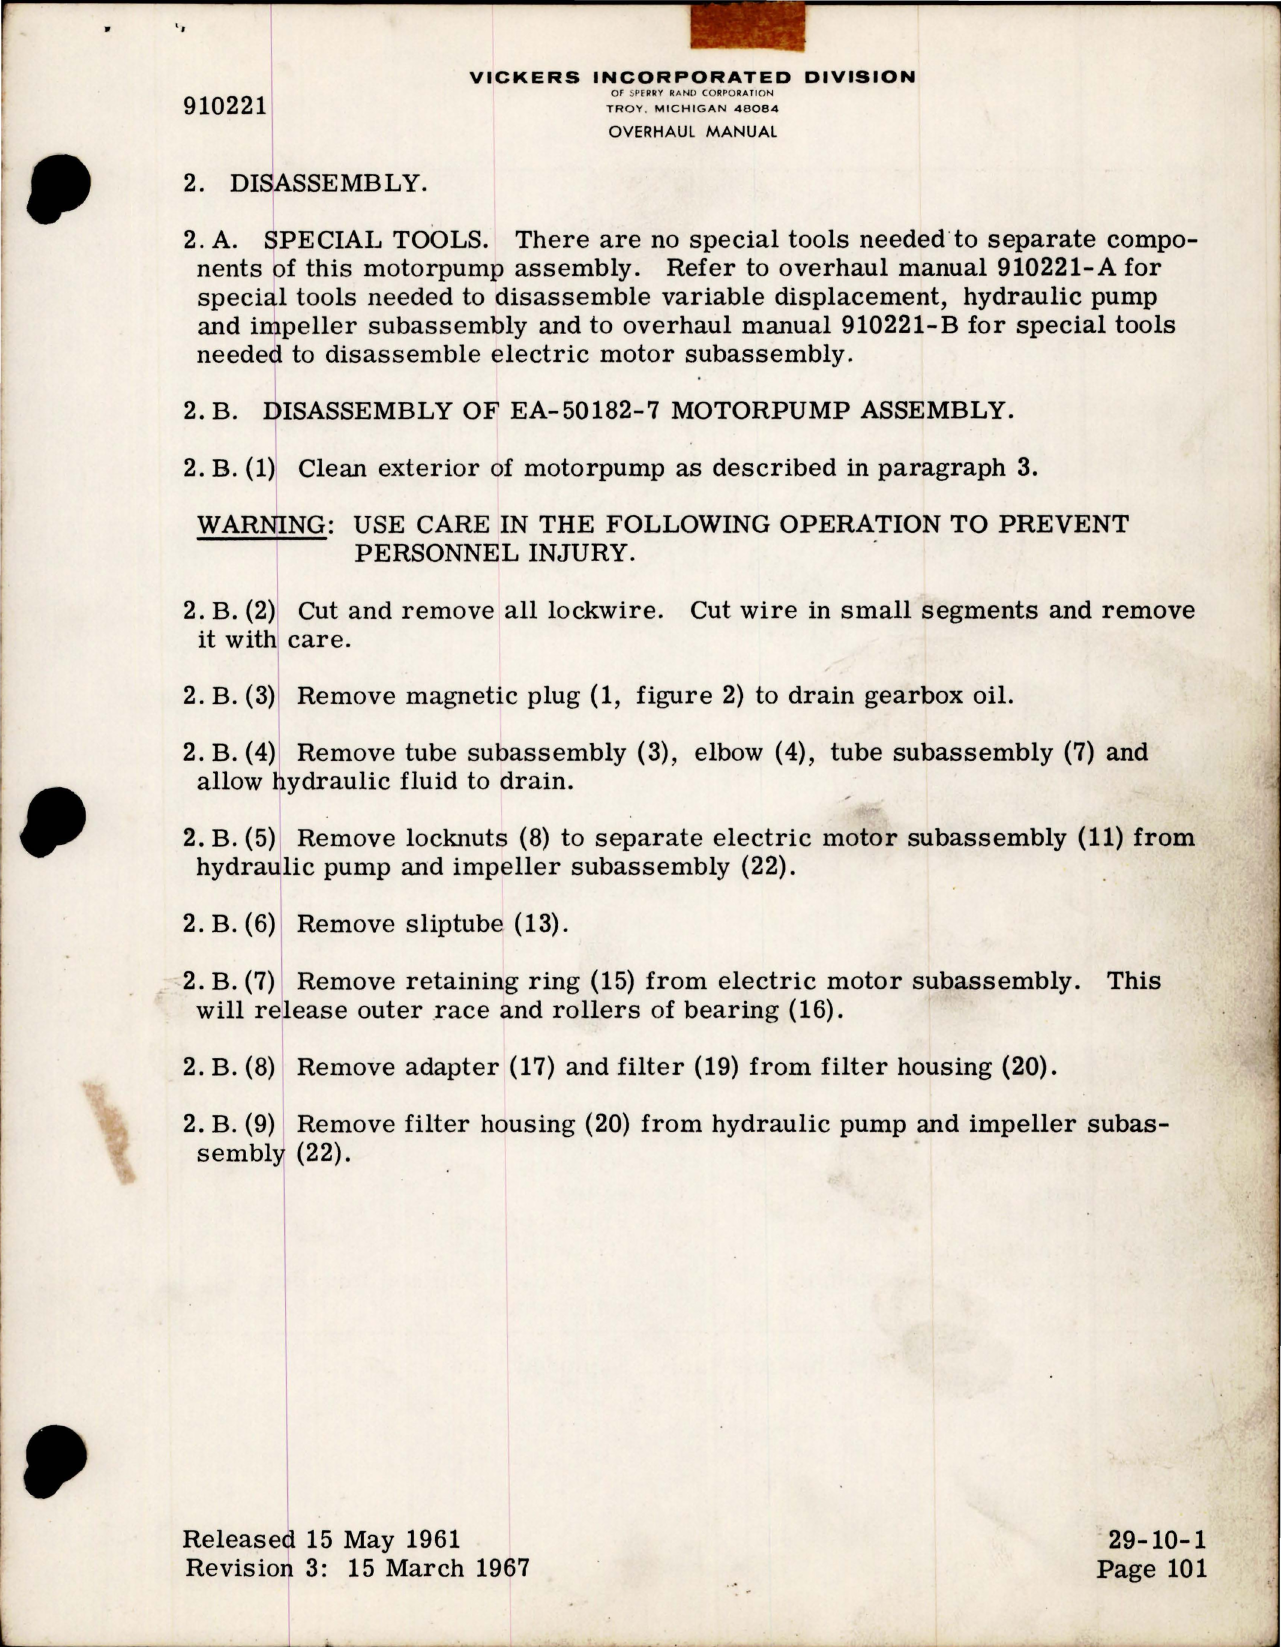 Sample page 5 from AirCorps Library document: Overhaul Manual for Hydraulic Motorpump - Models EA-50182-7 and EA-50182-8 - Revision 4 